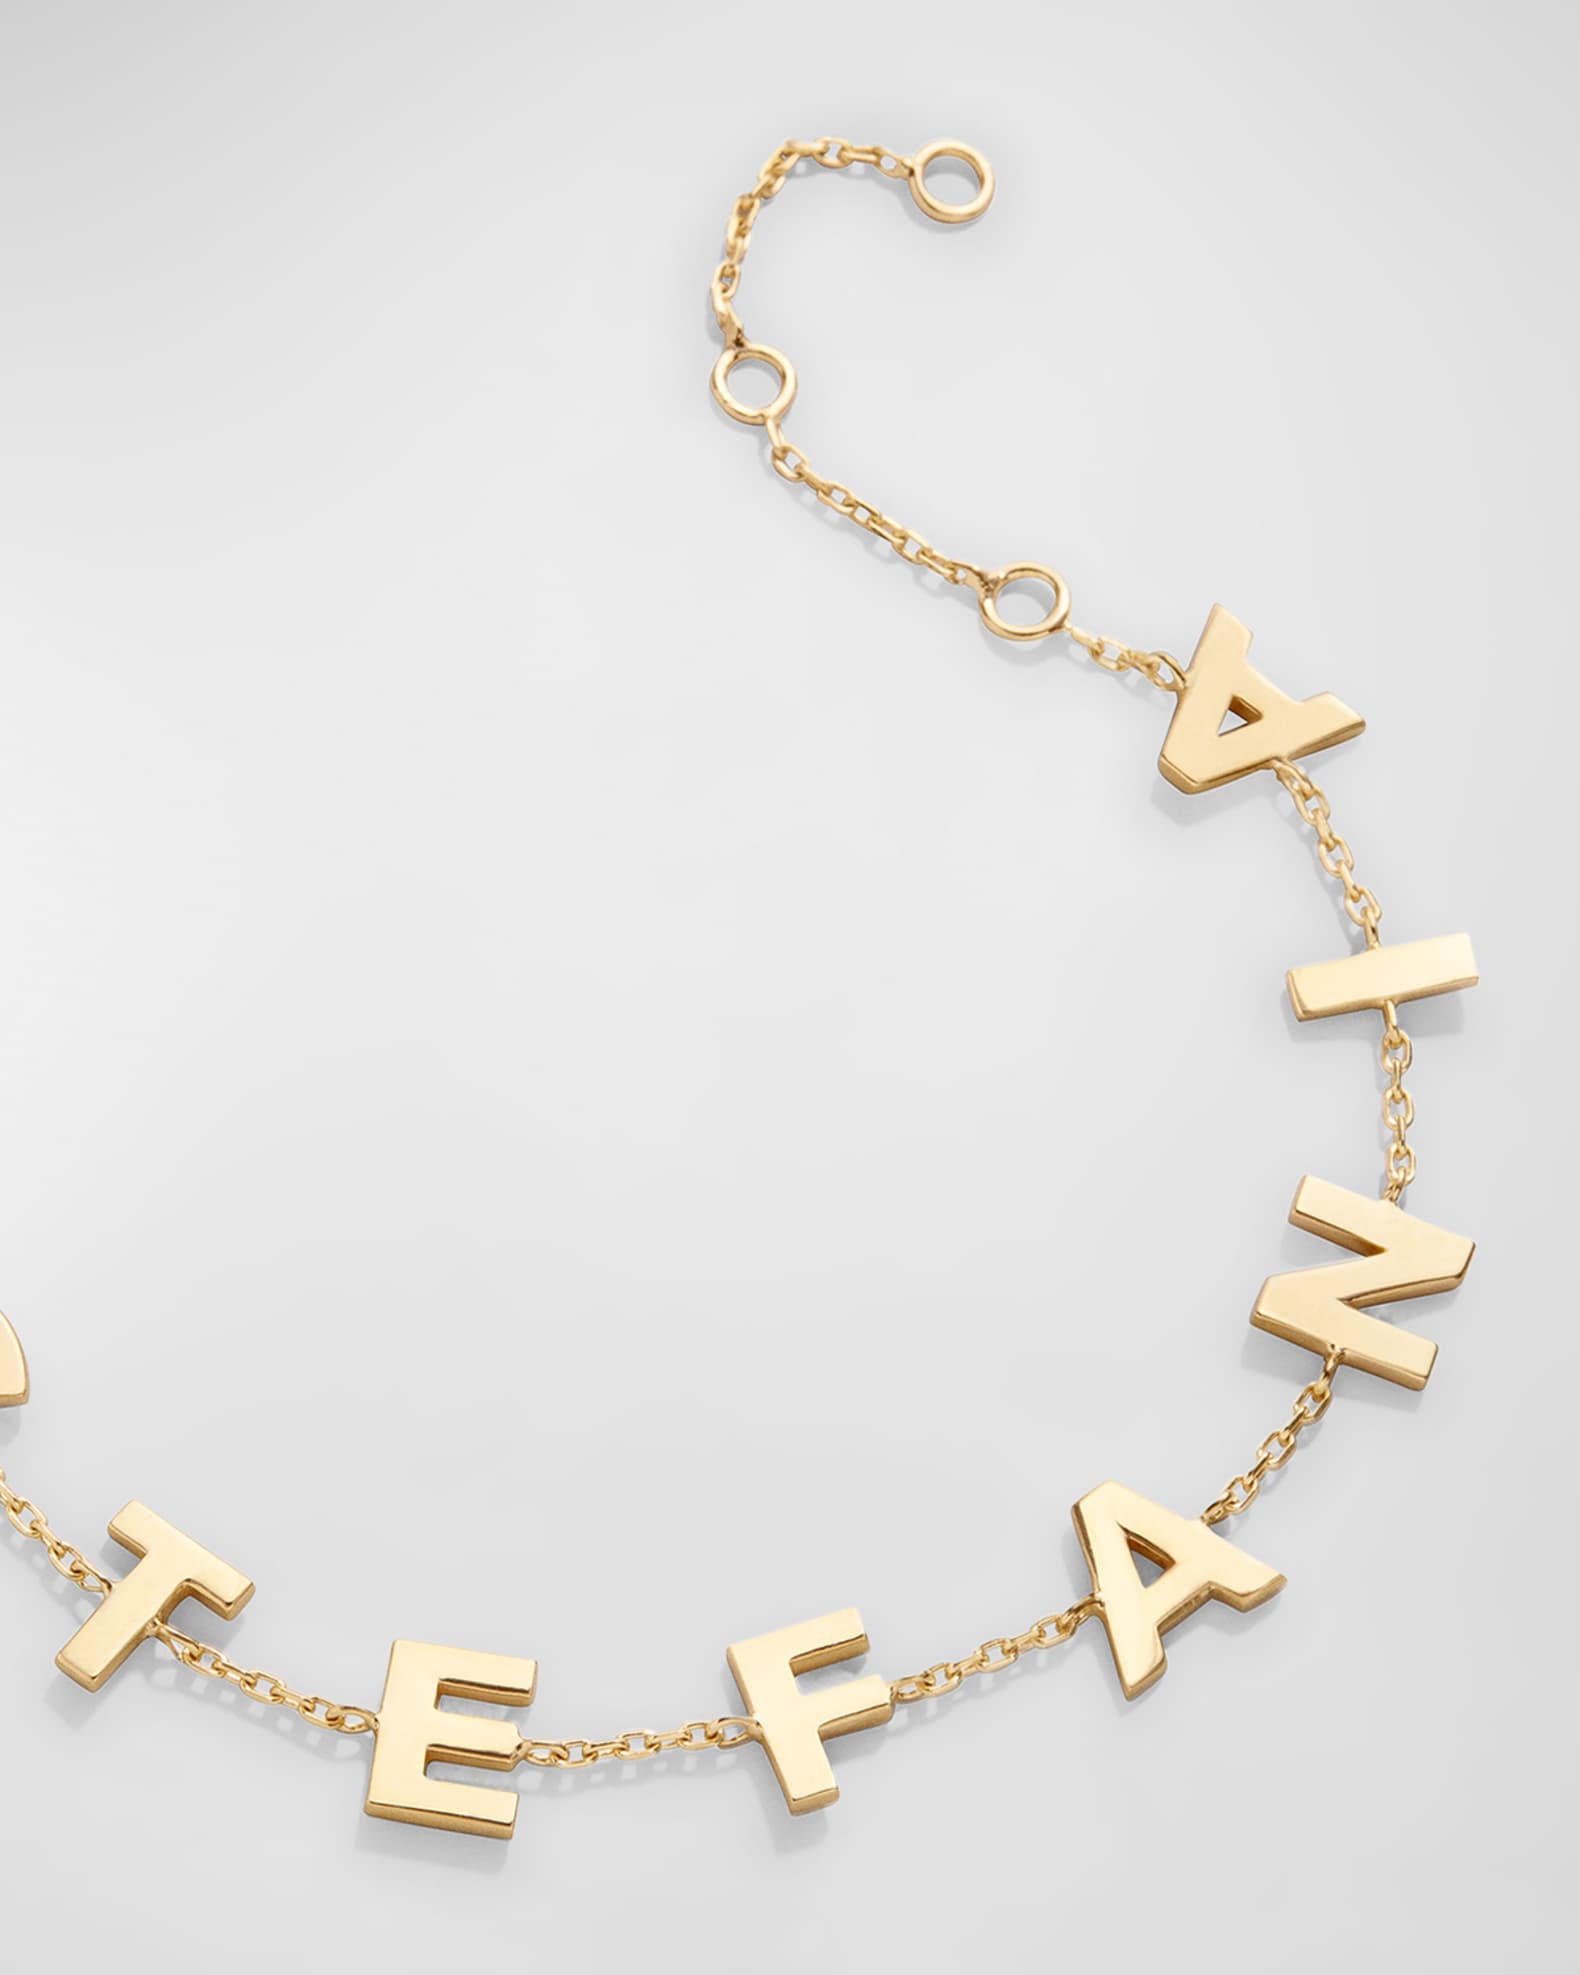 Name Bracelet with Capital Letters in 18K Gold Plating